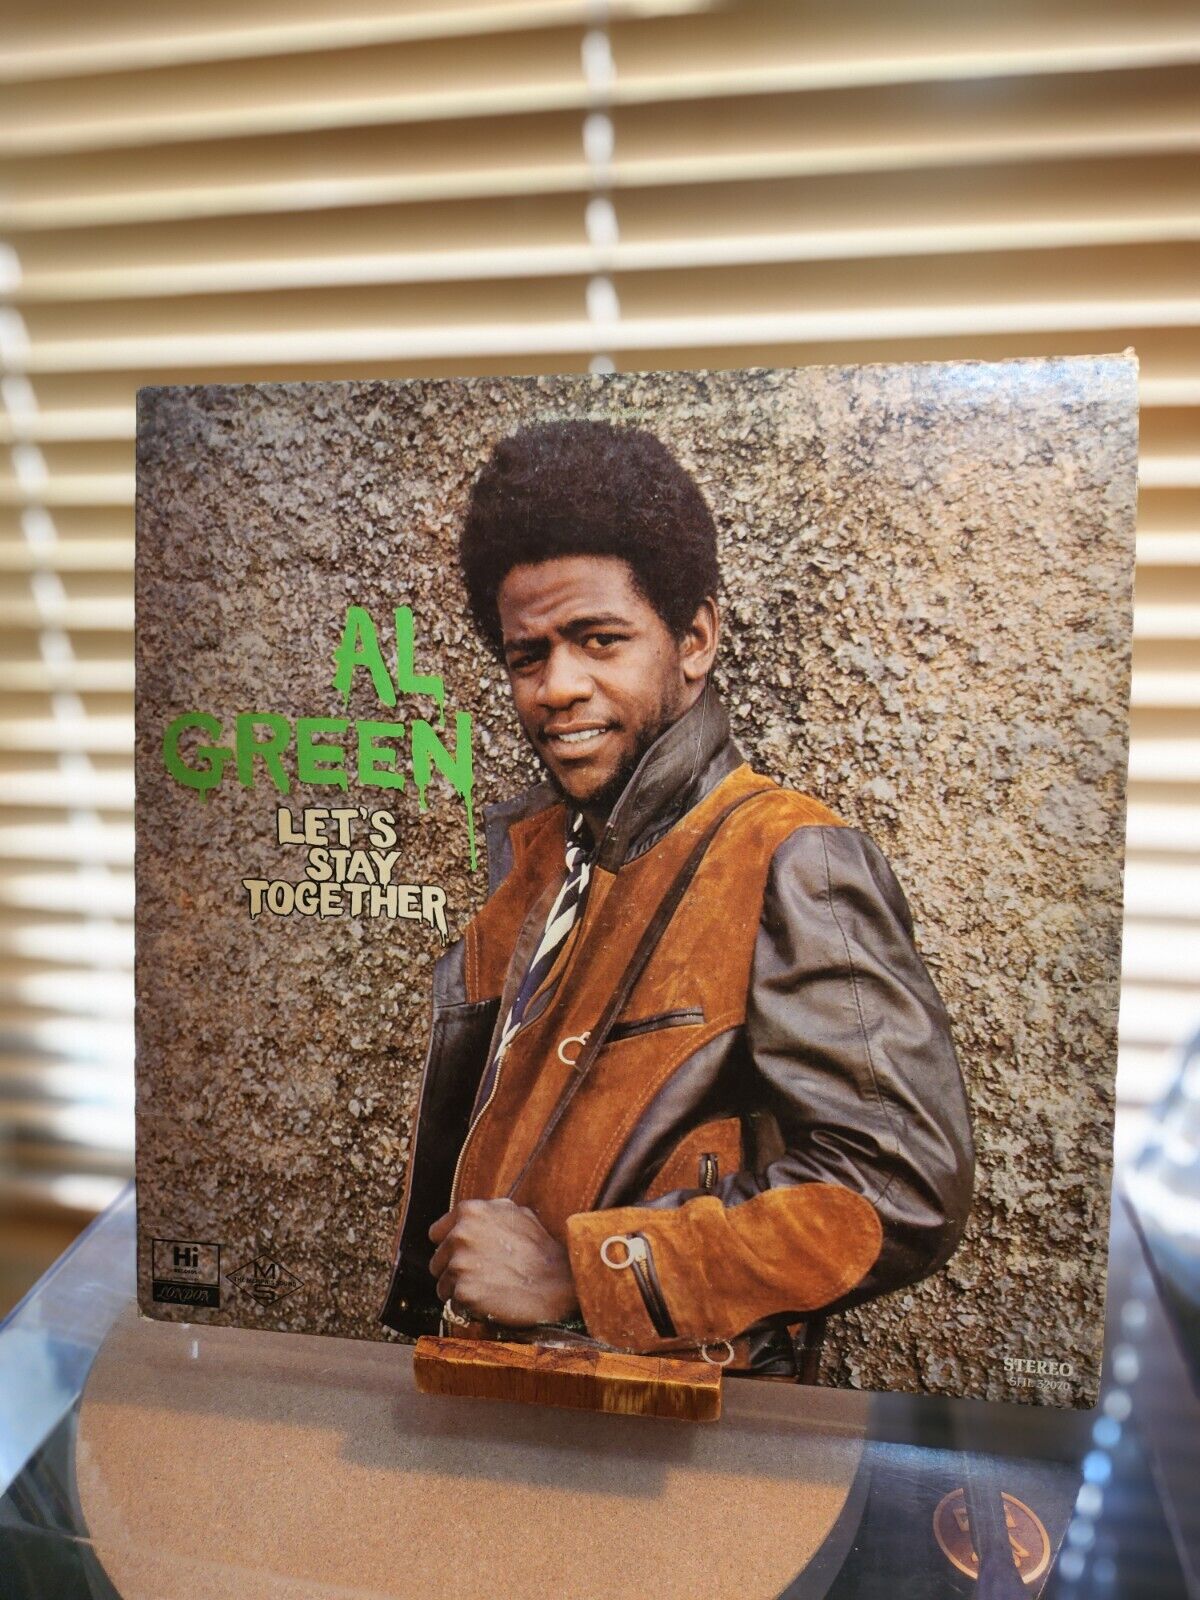 Al Green, Let's Stay Together, 1972 1st Hi records Stereo Press 